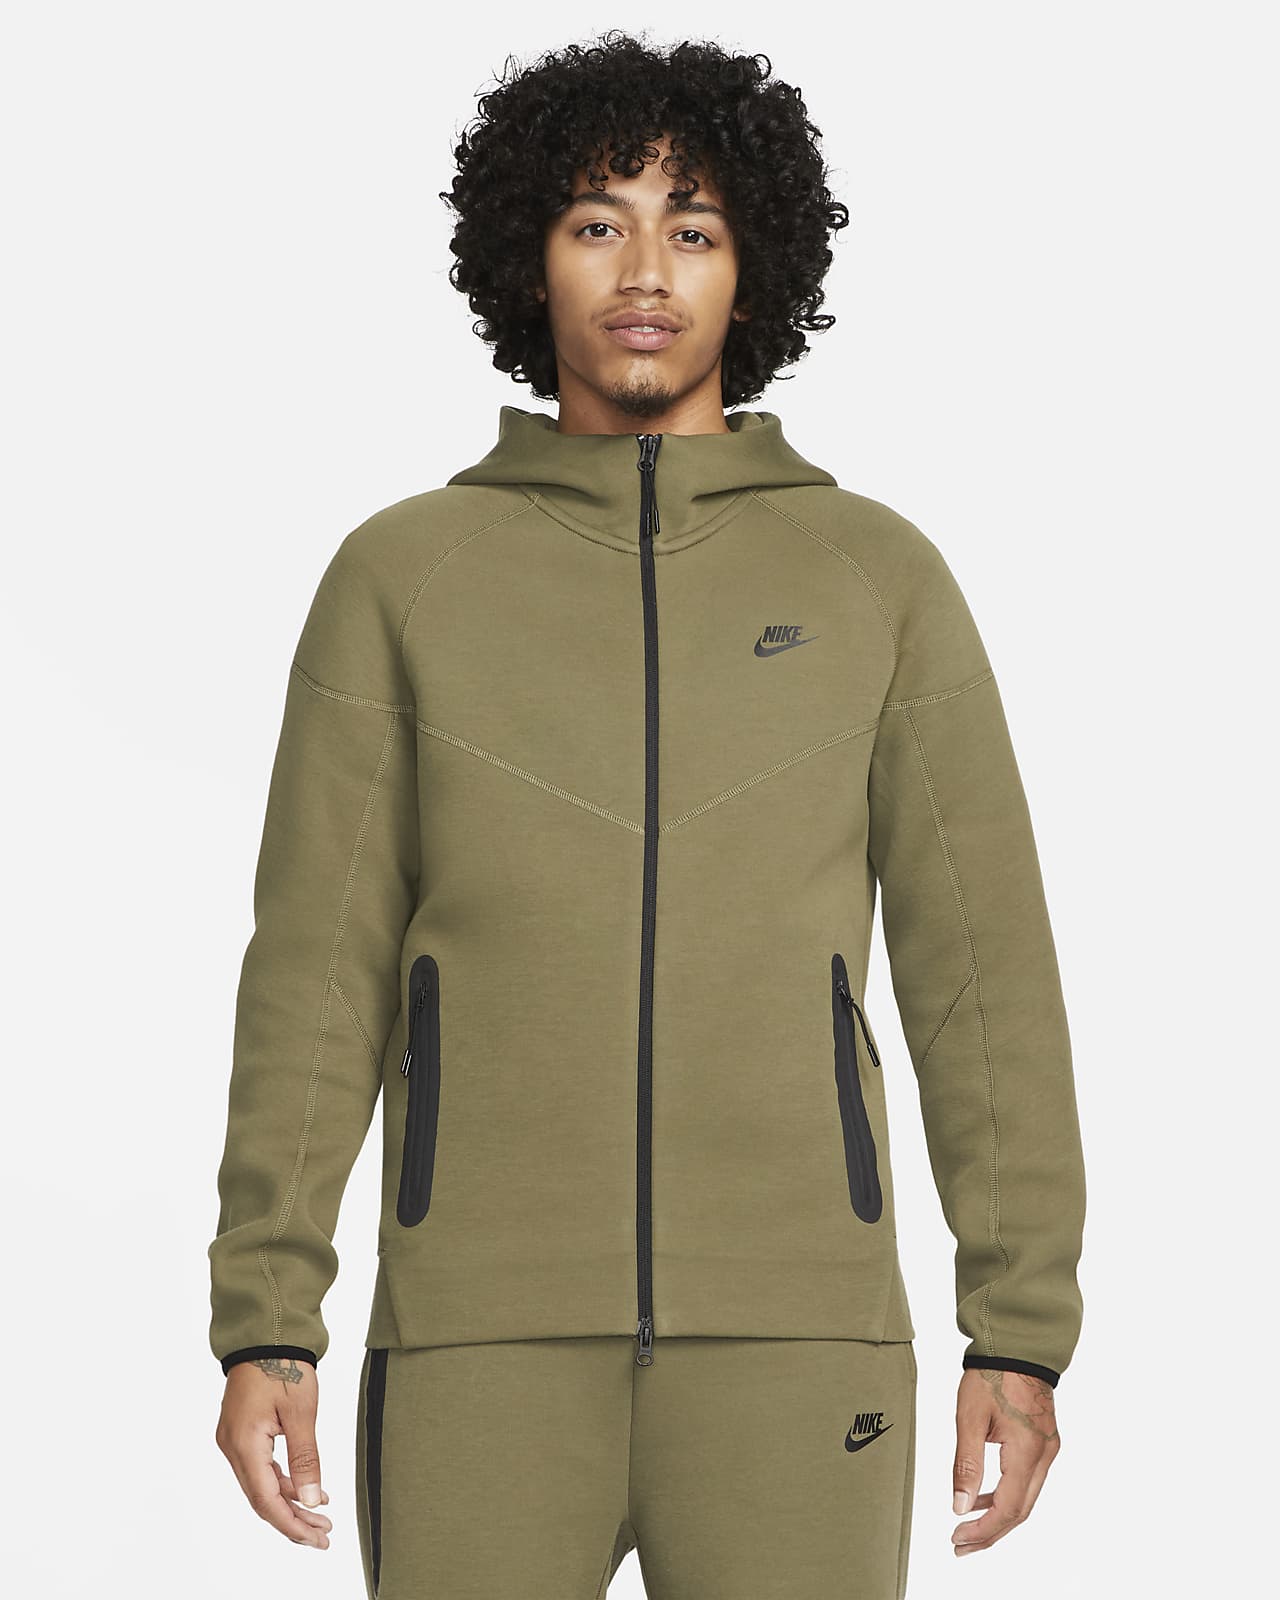 https://static.nike.com/a/images/t_PDP_1280_v1/f_auto,q_auto:eco/9b9e1e9d-b769-41aa-9984-af995dd070bd/sportswear-tech-fleece-windrunner-hoodie-CPK66p.png